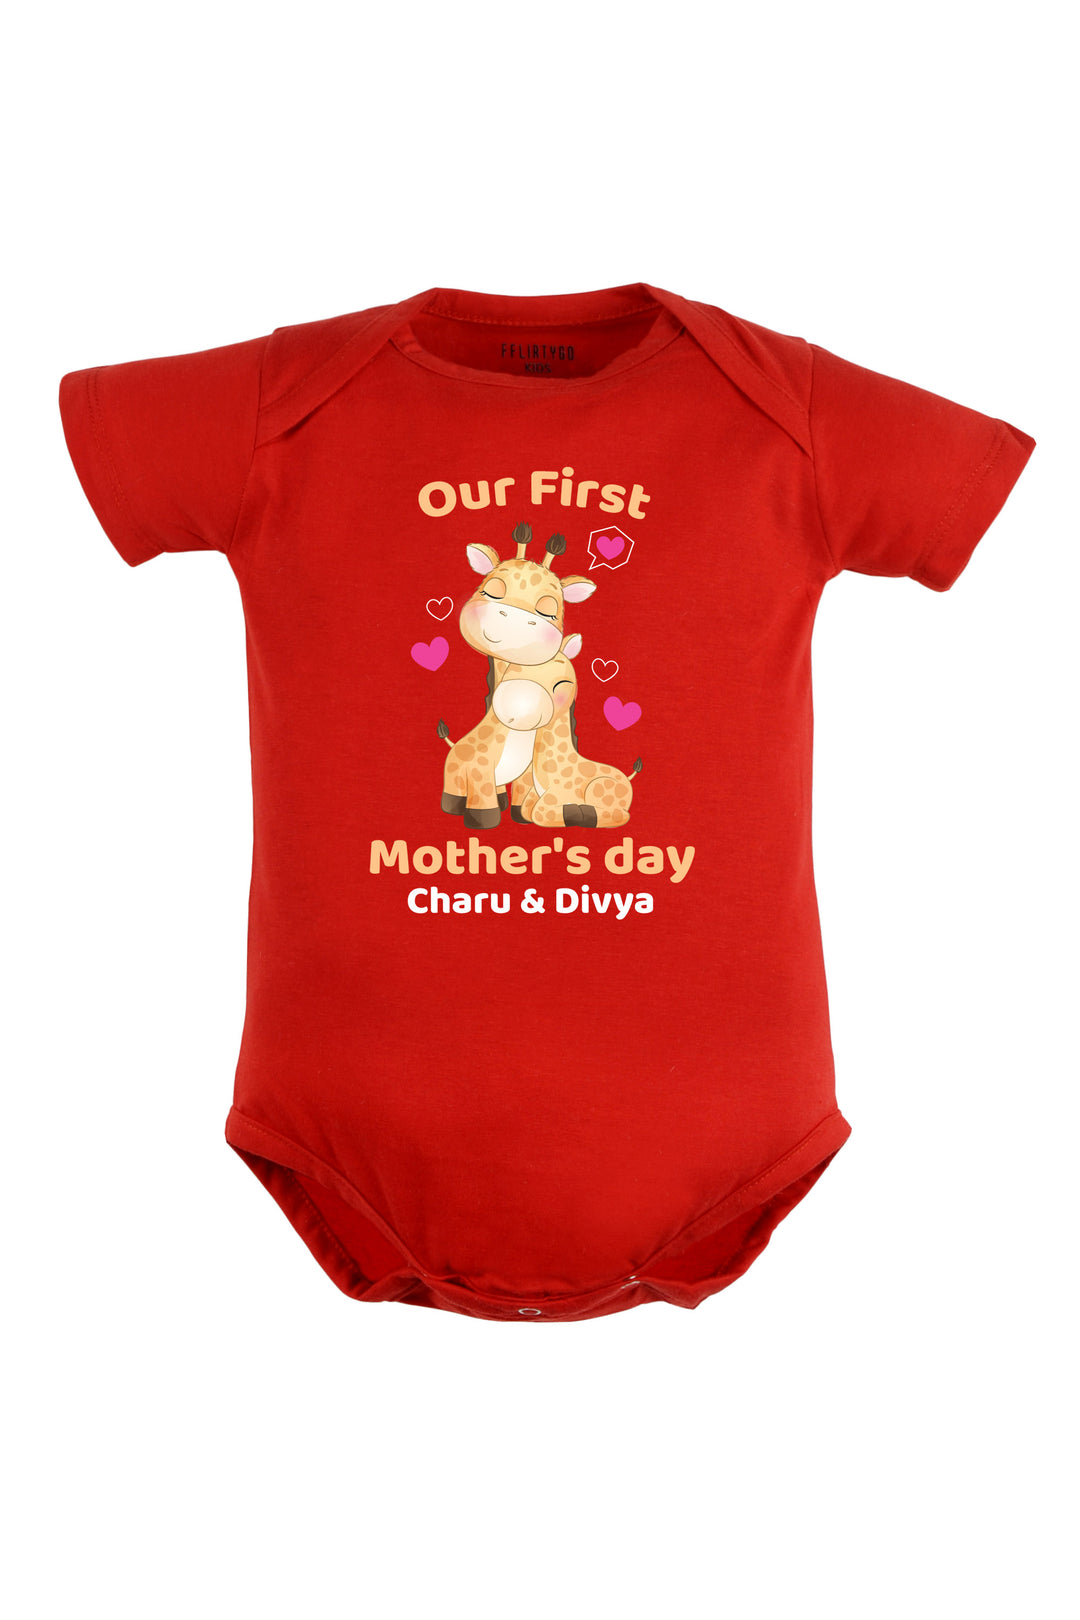 Our First Mother's Day Baby Romper | Onesies w/ Custom Name